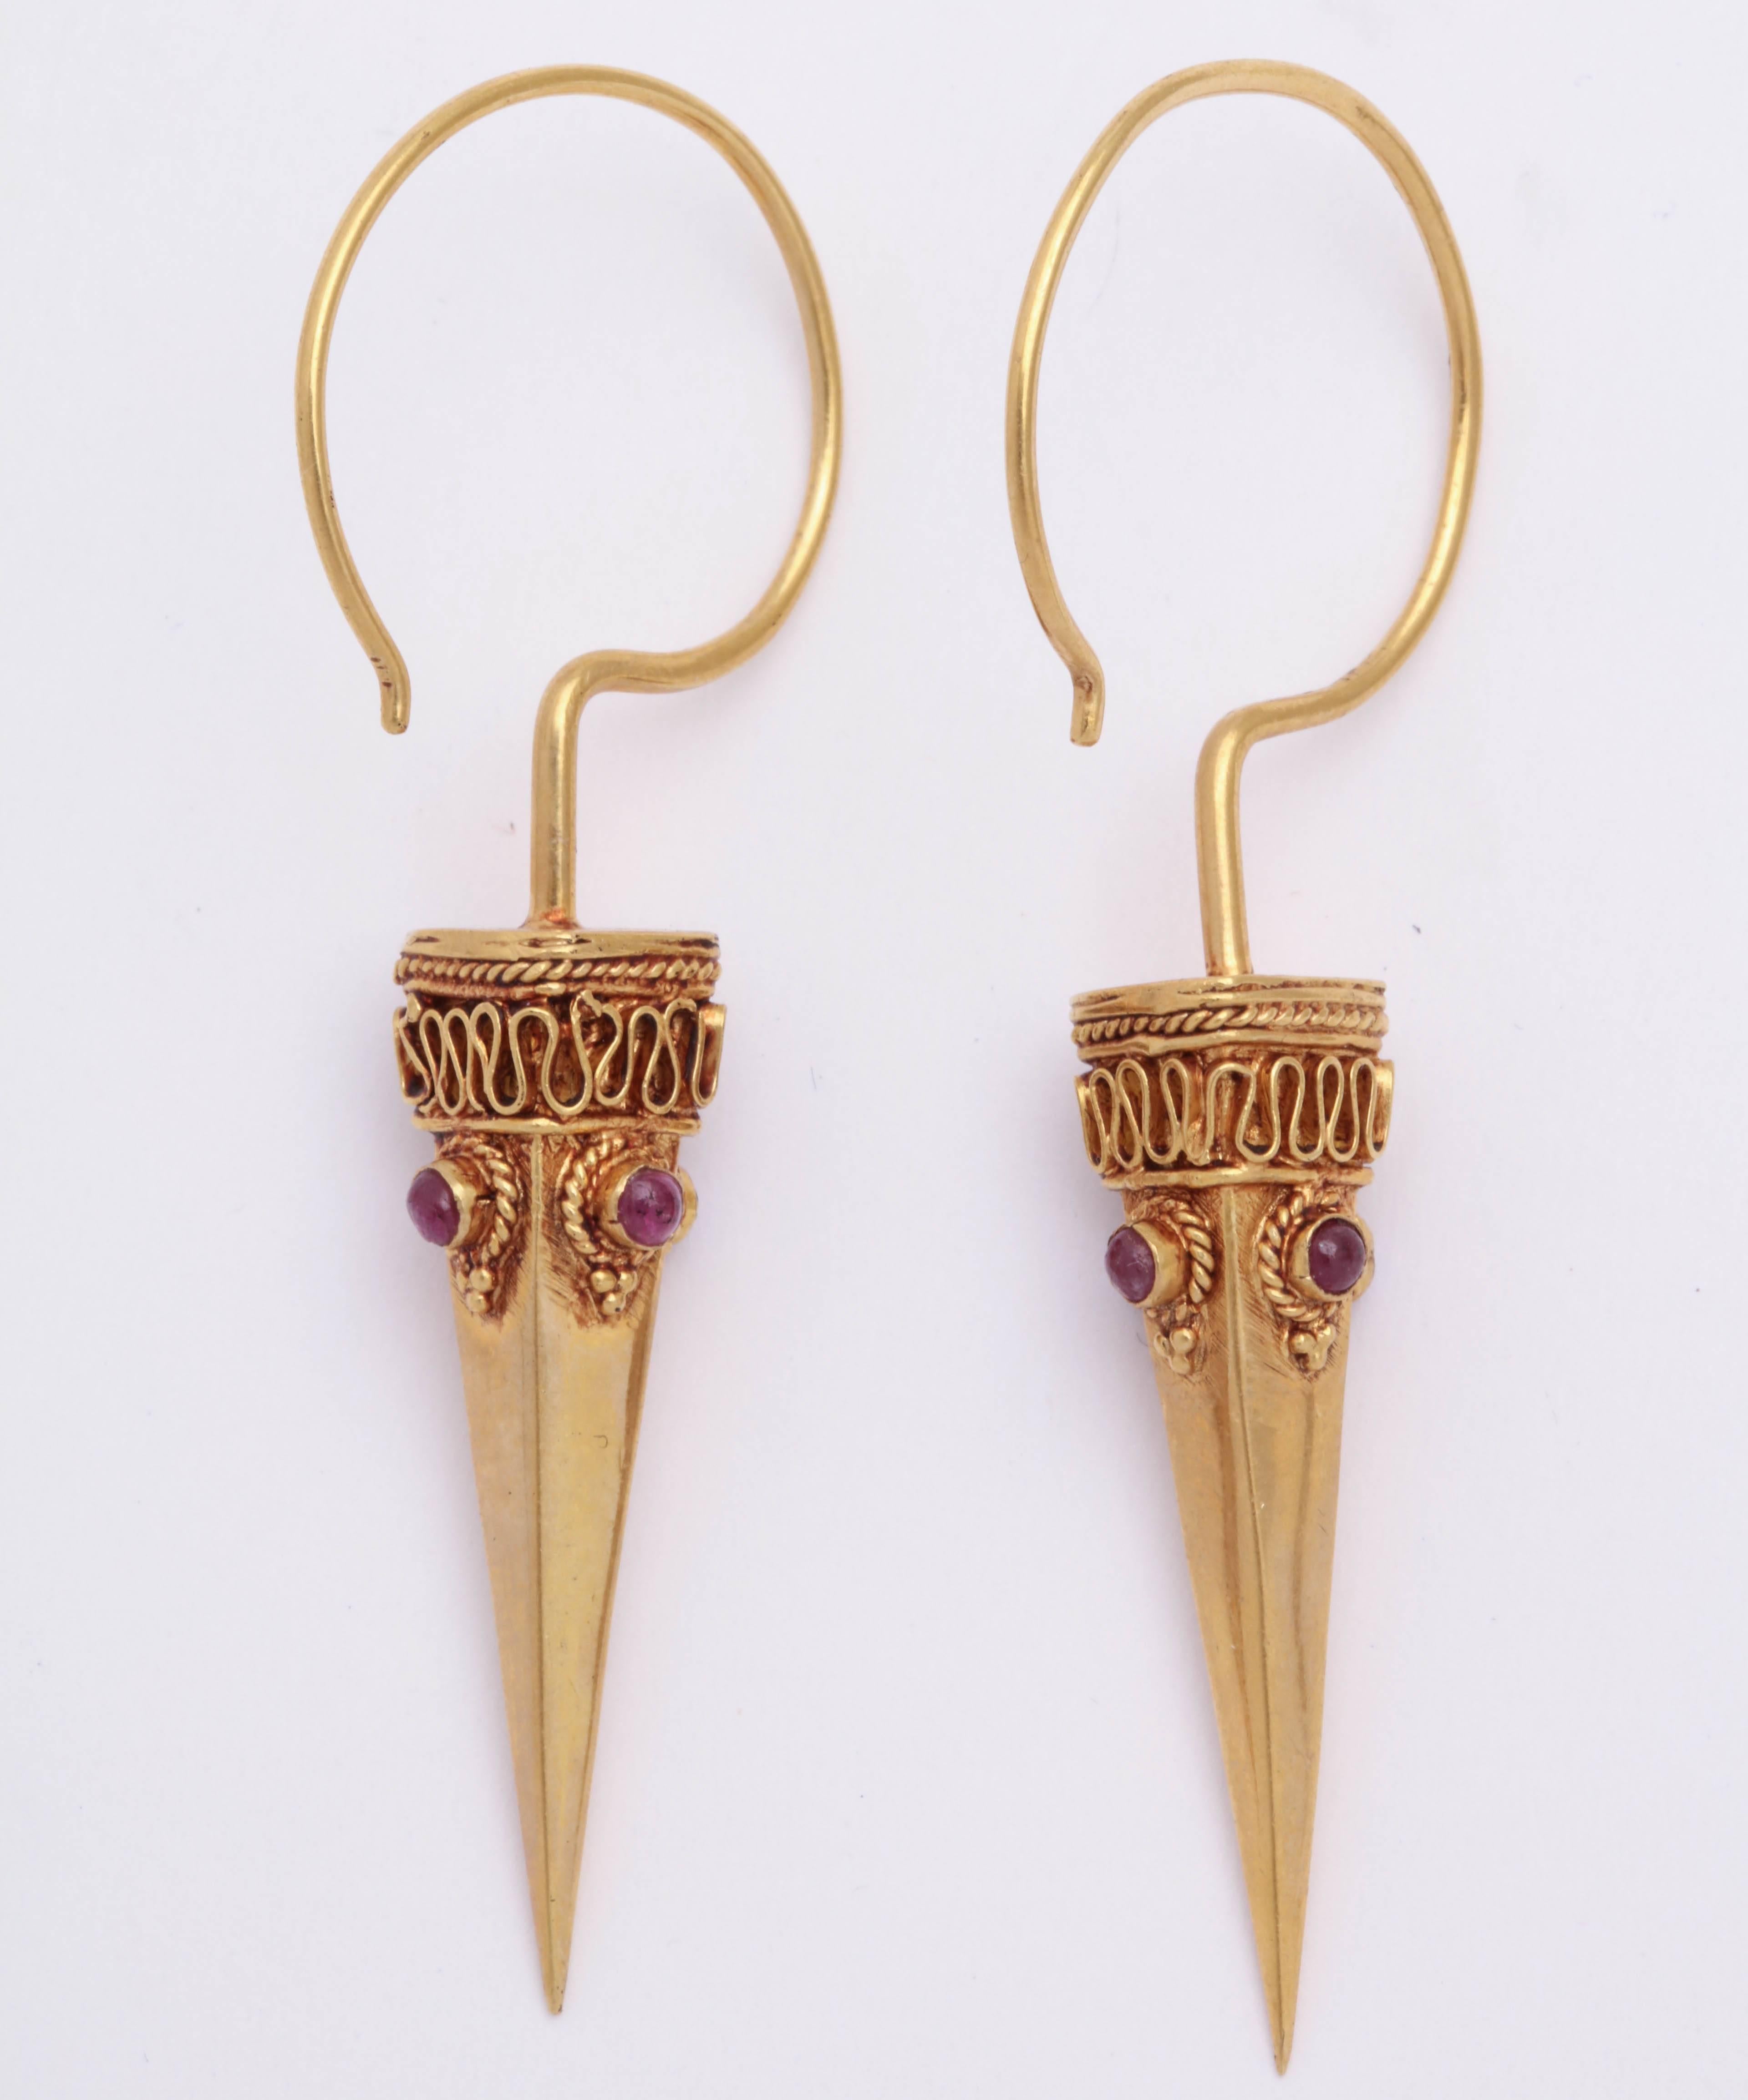 A pair of 18kt yellow gold and cabochon ruby spike earrings. The earrings are suspended from large 18kt yellow gold ear wires. The rubies are bezel set and framed with granulation and rope.

Length: 2.25 inches
Width: .30 inch